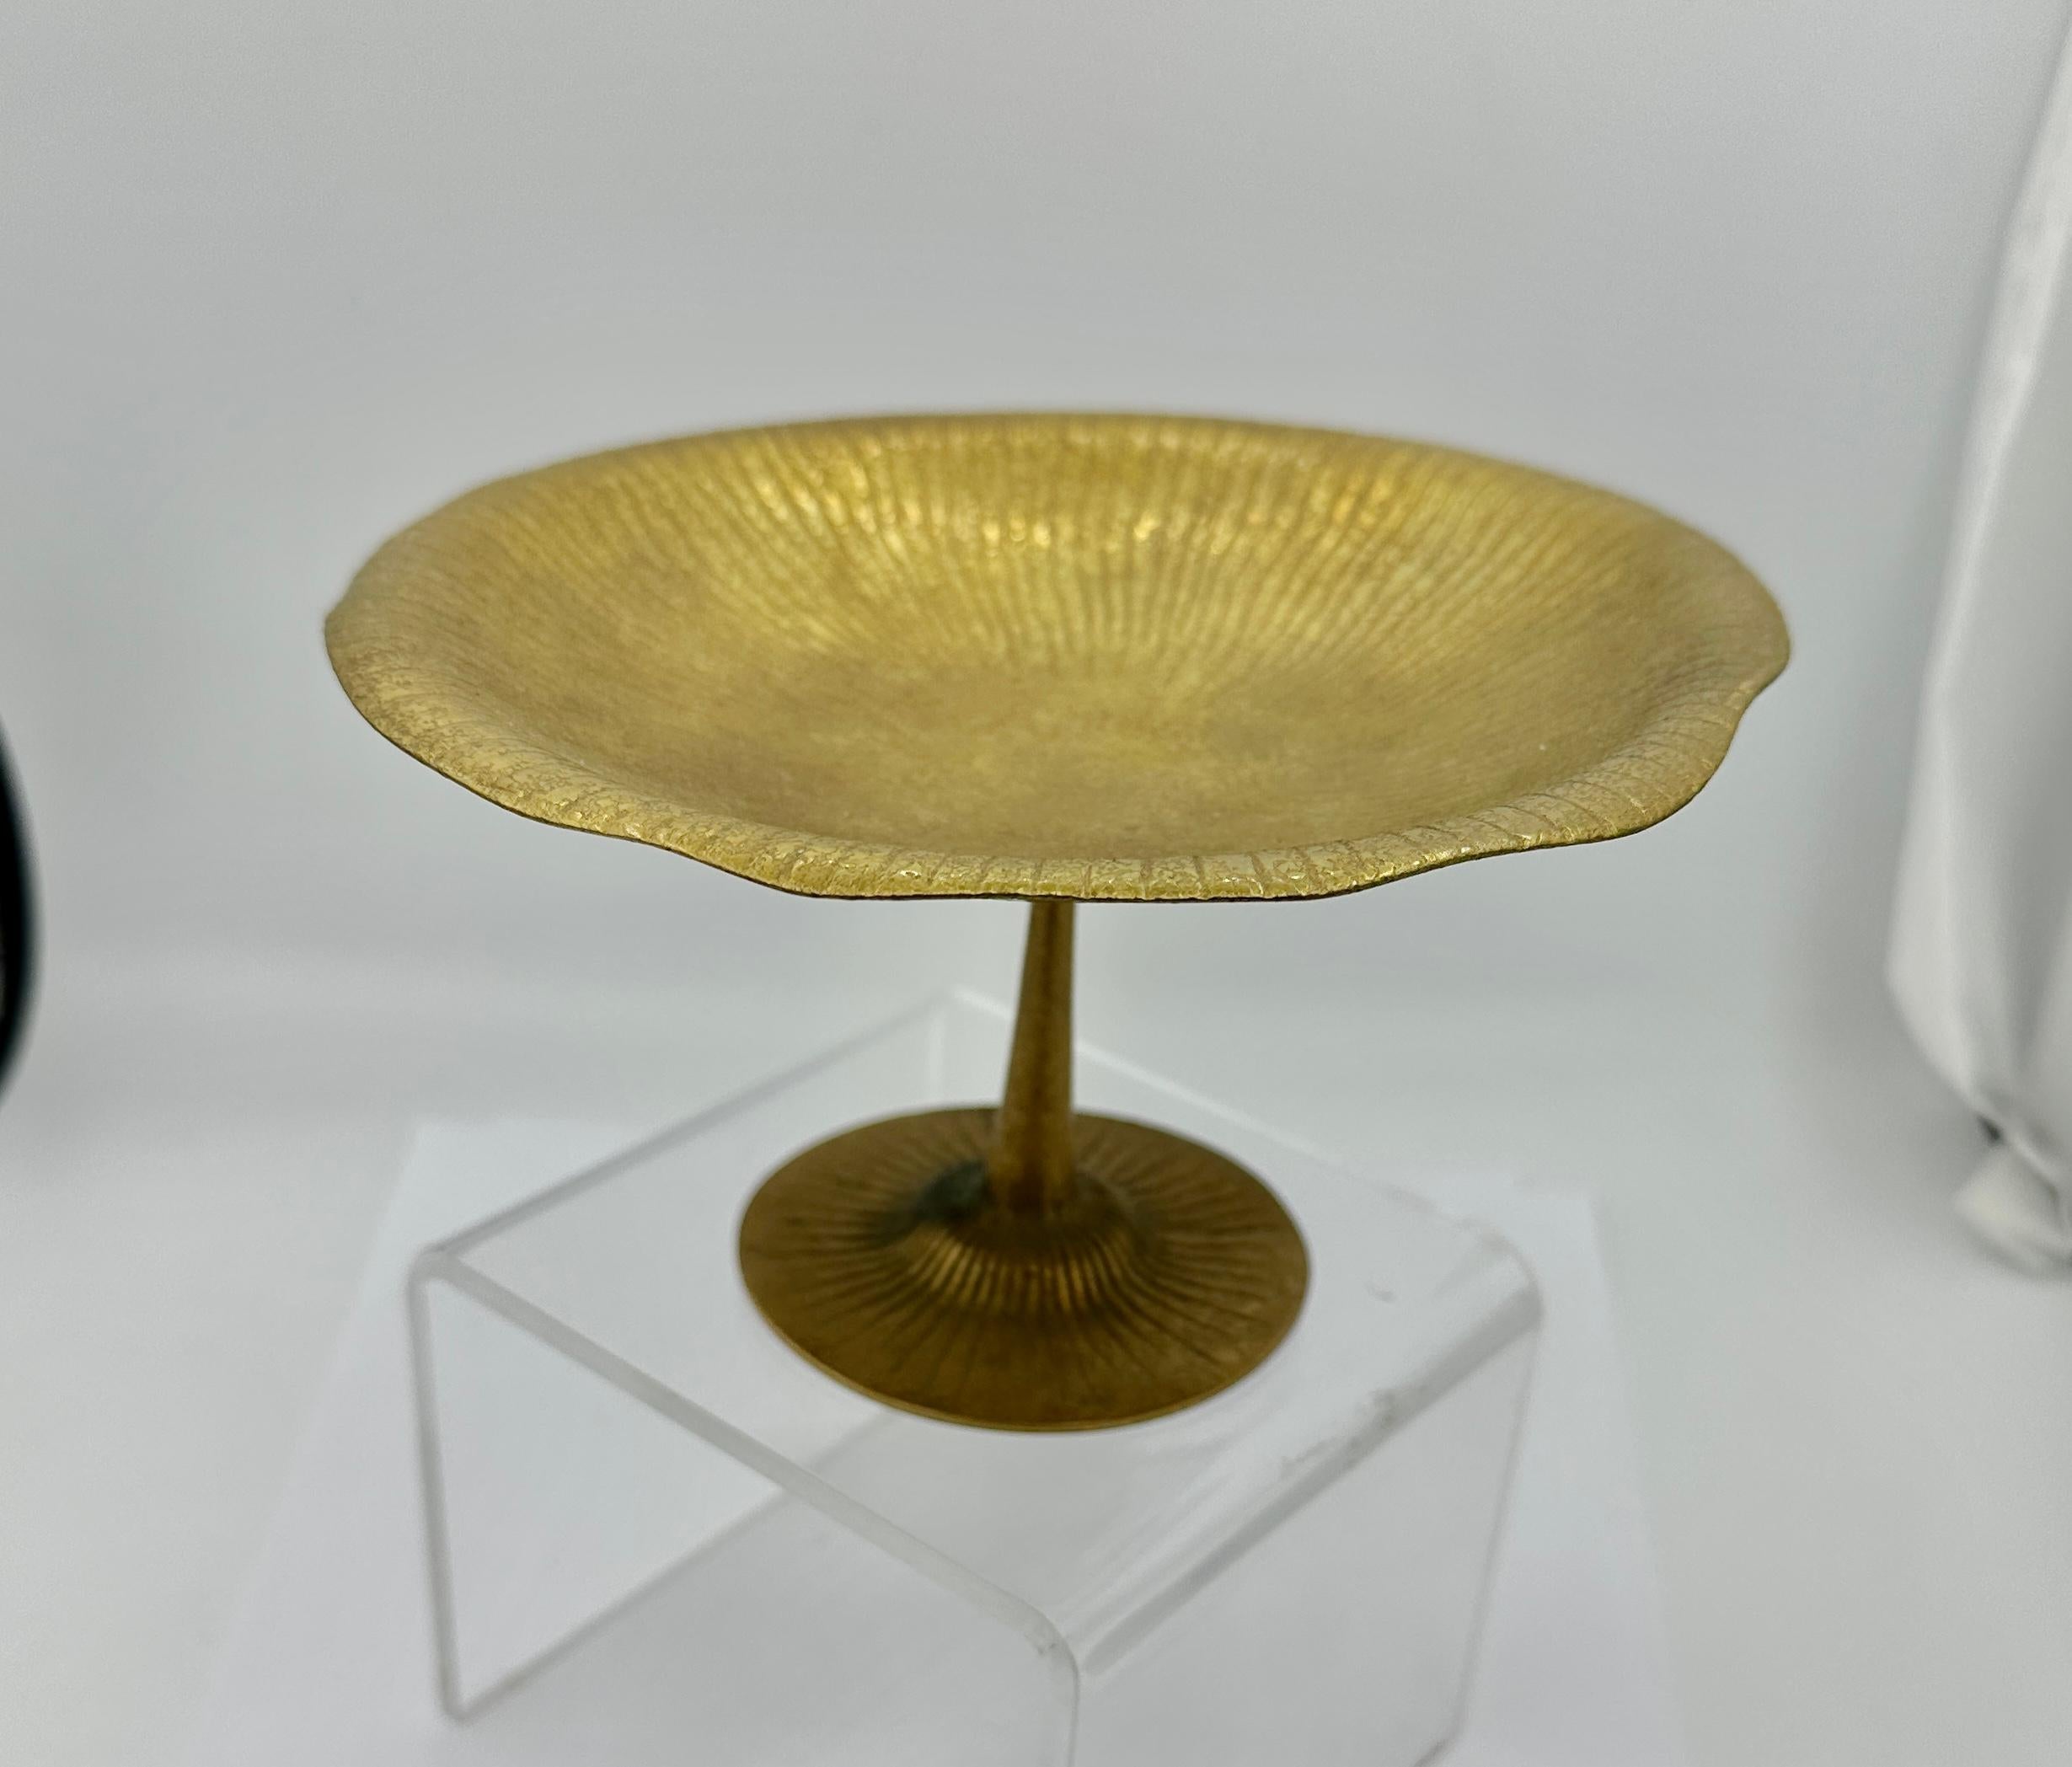 This is a rare Tiffany Studios Art Nouveau gilt bronze, bronze dore Tazza or Footed Bowl, circa 1910, impressed Tiffany Studios New York 1725, in a Lily Pad or Lotus Leaf nature inspired motif.  The Tazza is exquisite with wonderful veined details